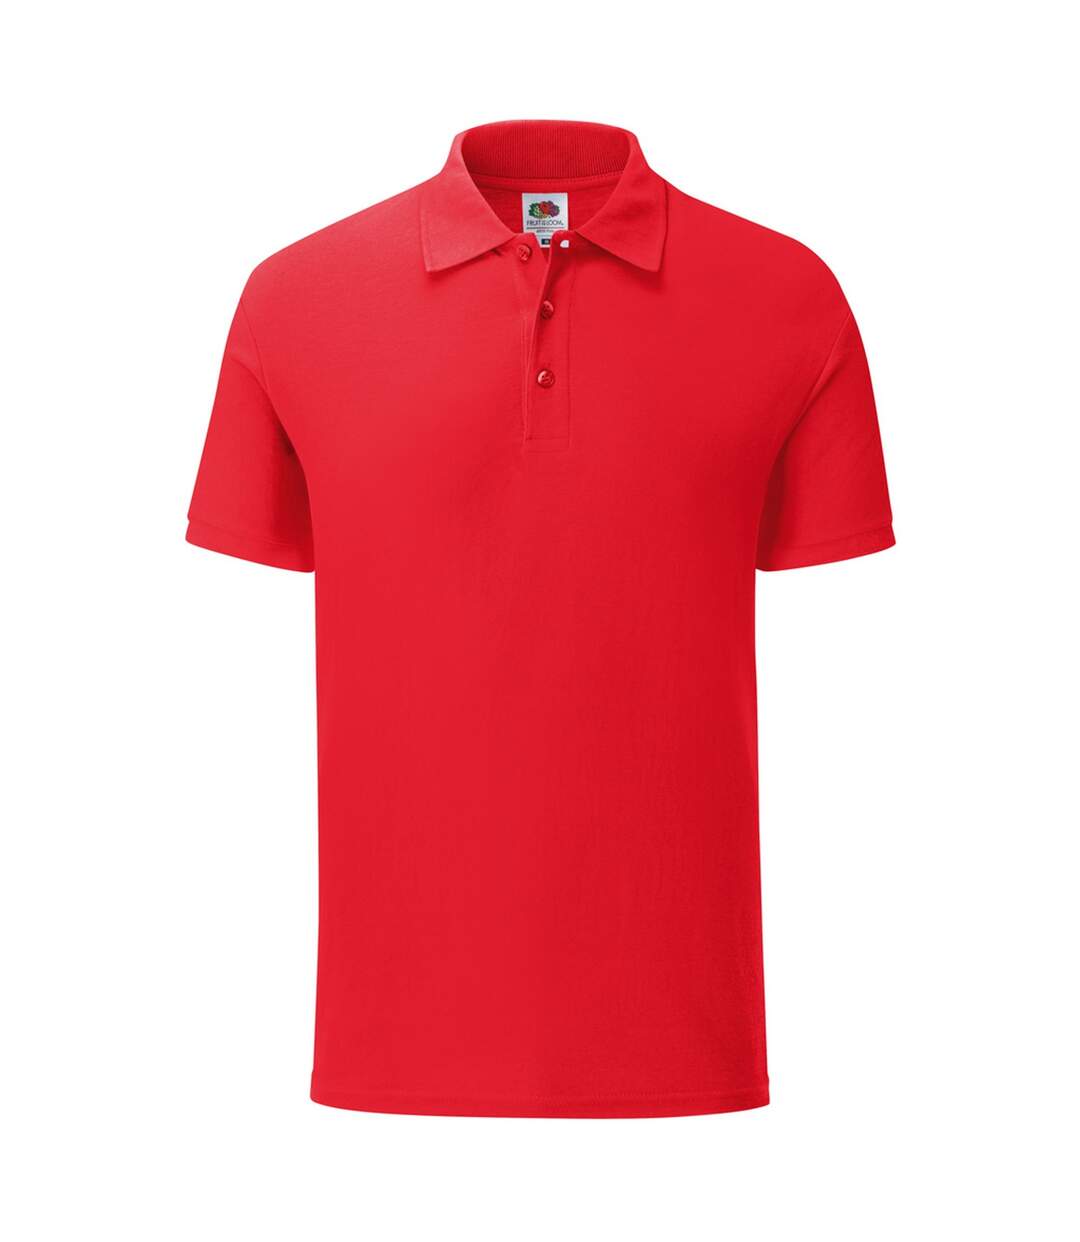 Fruit Of The Loom Mens Tailored Poly/Cotton Piqu Polo Shirt (Red) - UTPC3572